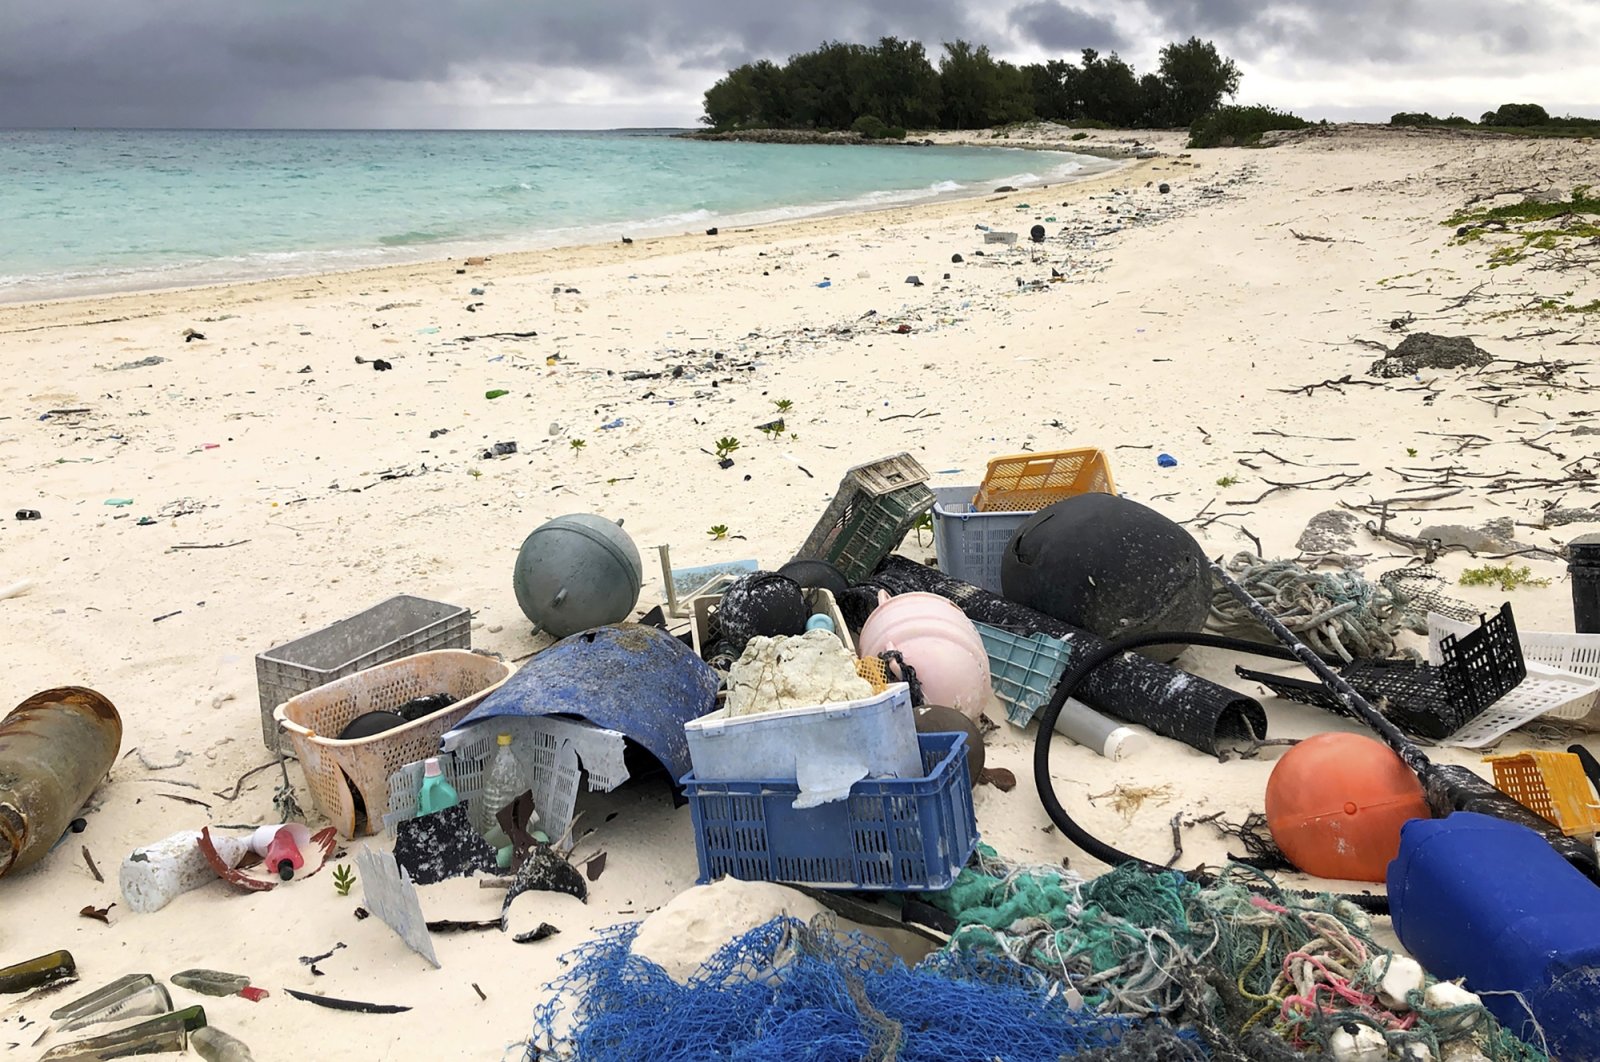 Plastic and other debris is seen on the beach on Midway Atoll in the Northwestern Hawaiian Islands, U.S., Oct. 22, 2019. (AP Photo)